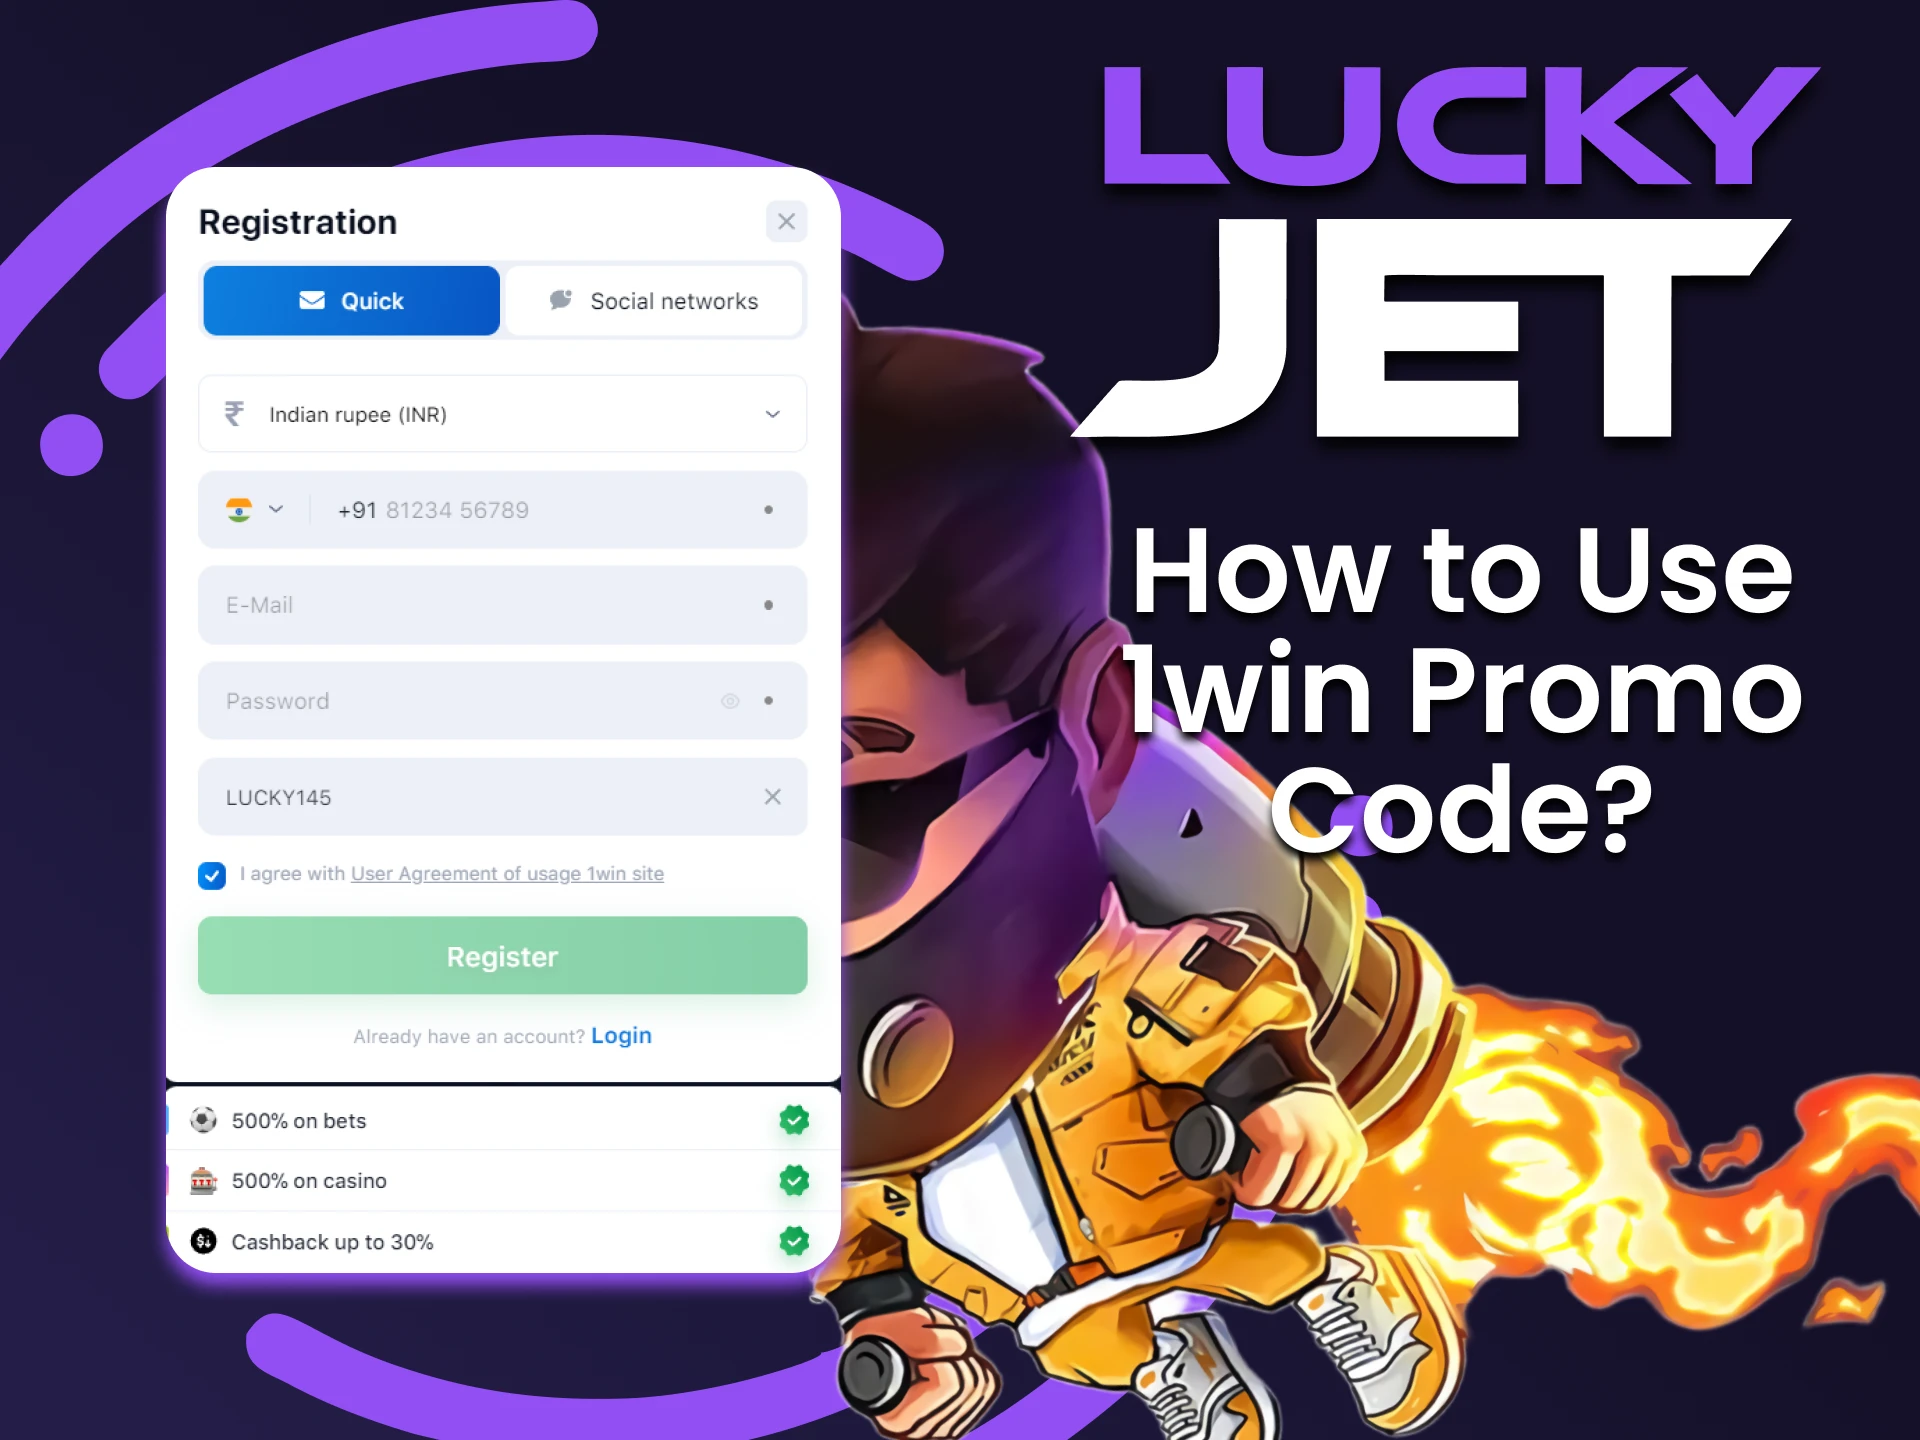 Use the promo code for the game Lucky Jet from 1win.